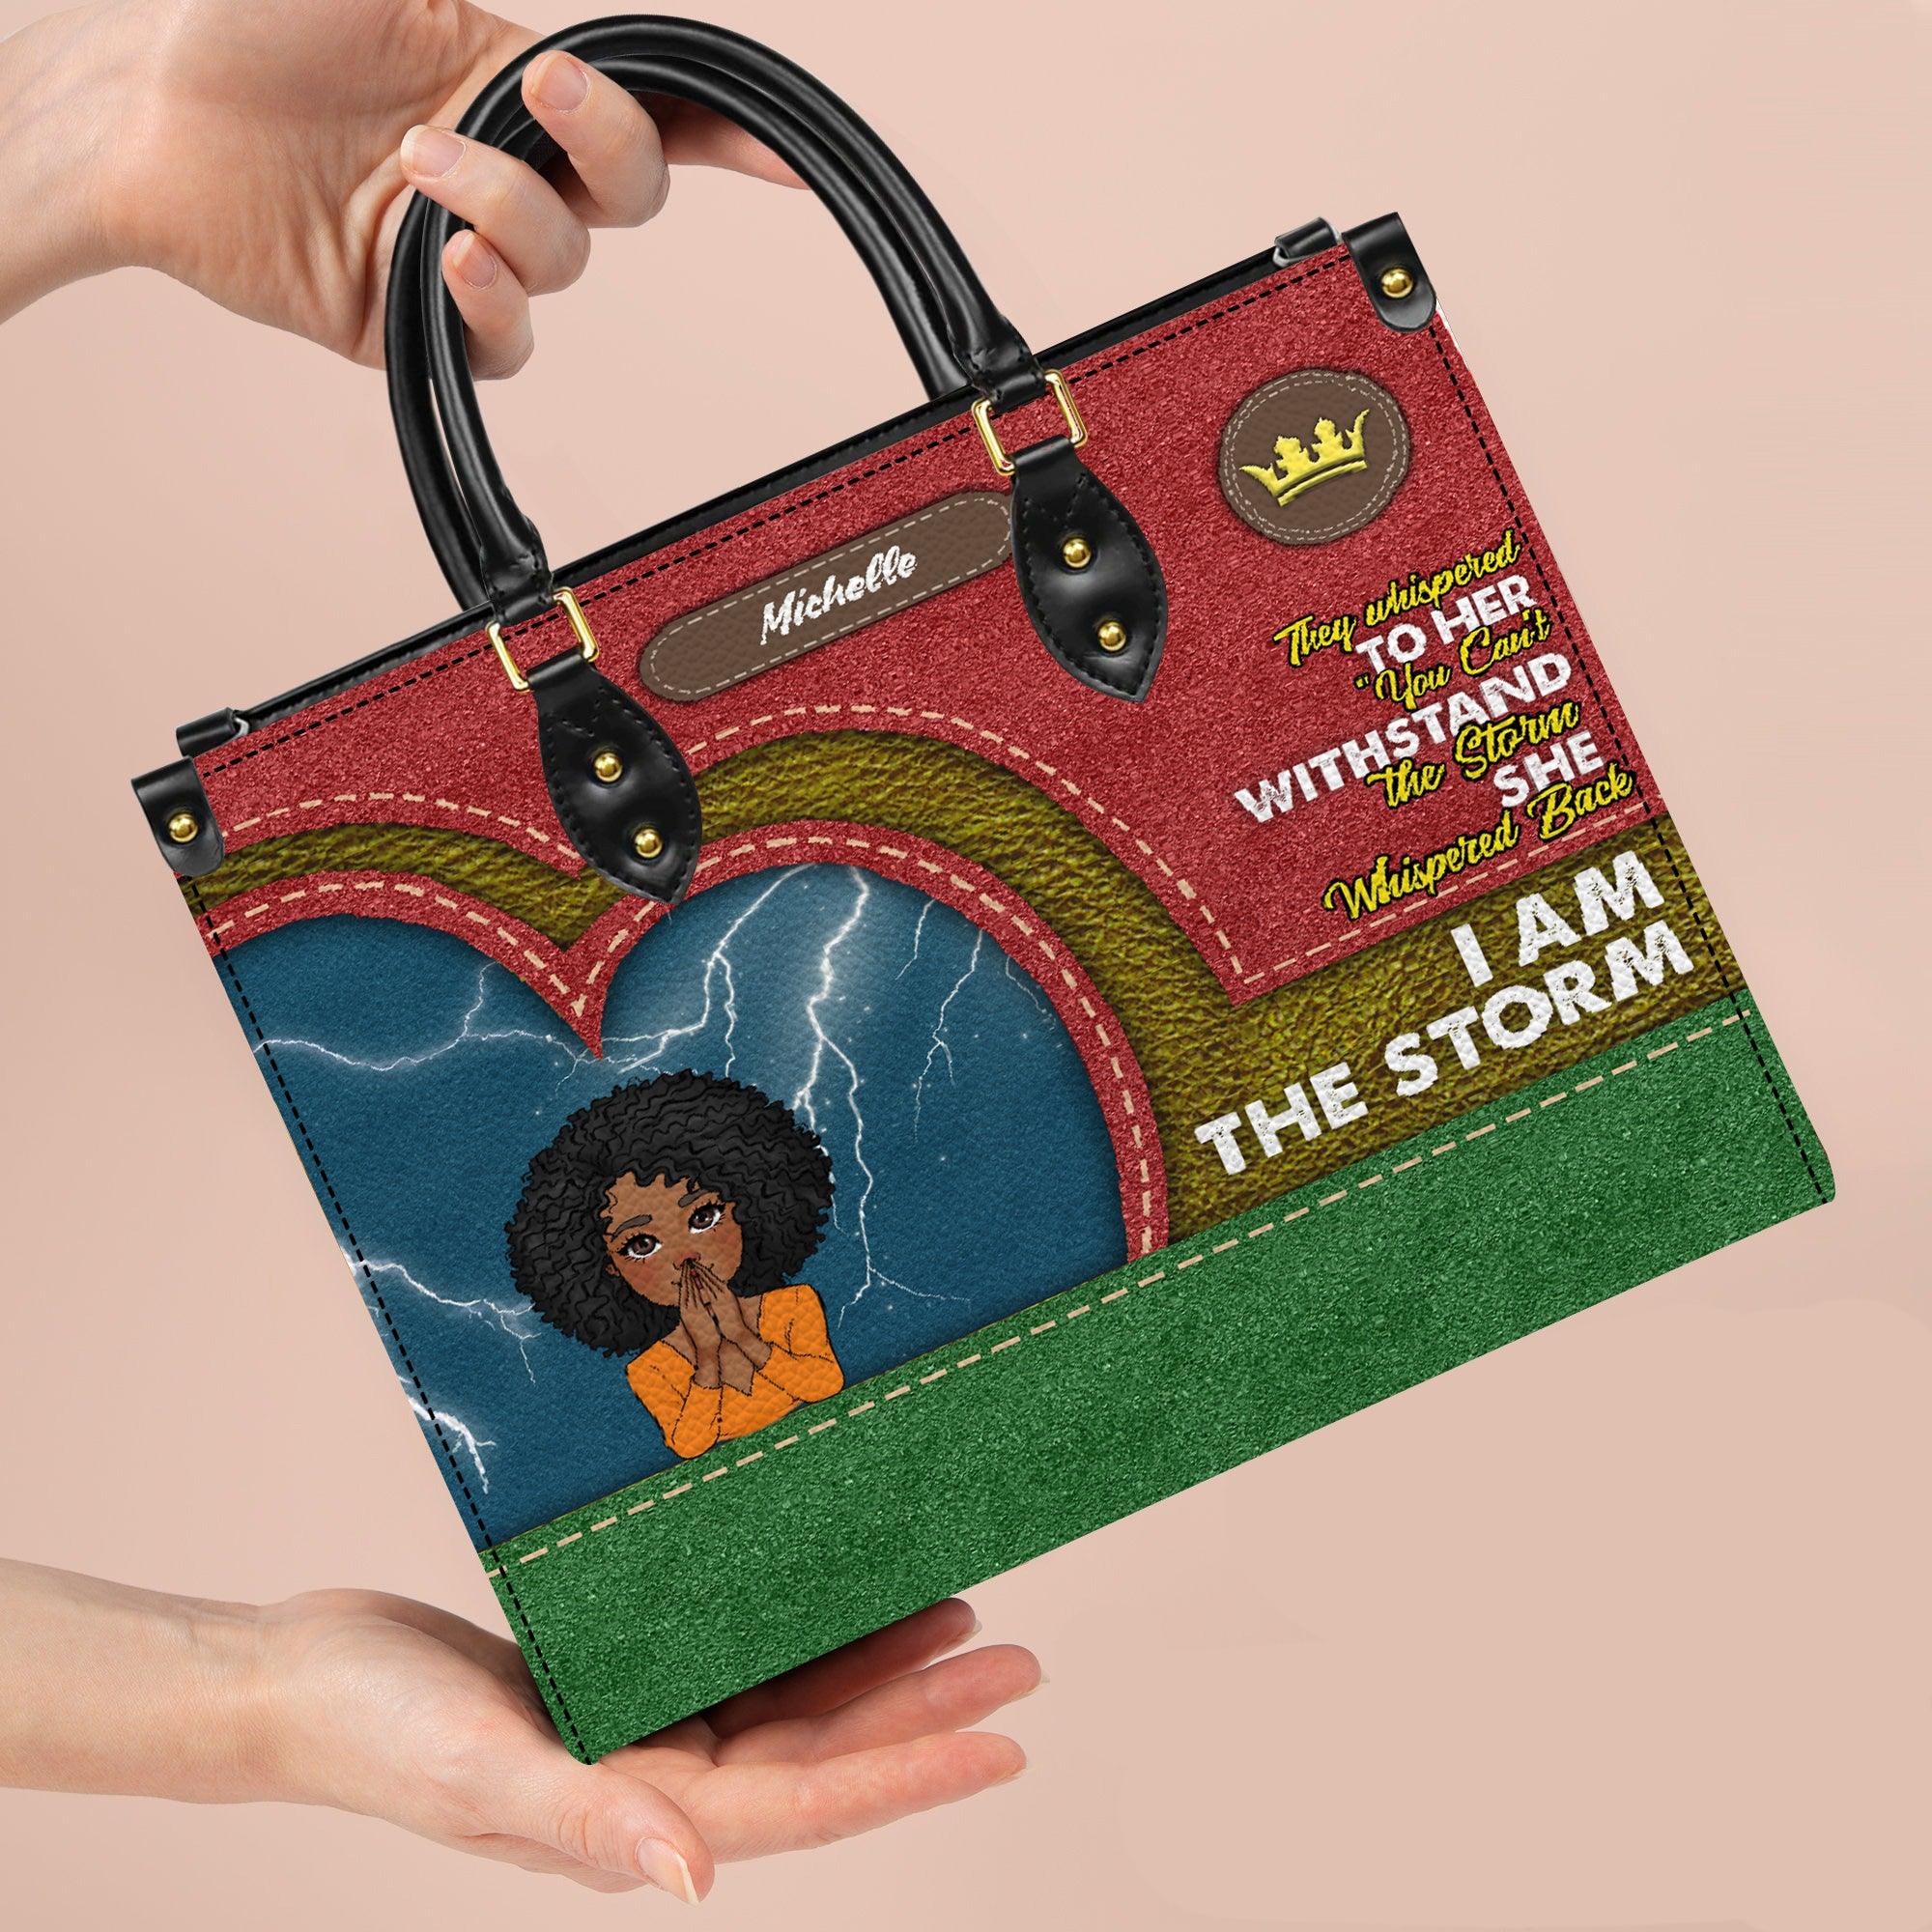 She Whispered Back I Am The Storm - Personalized Black Girl Handbag - Gift For Wife, Mom, Black Girl, Black Woman, African American, Black History Month, Juneteenth - Suzitee Store